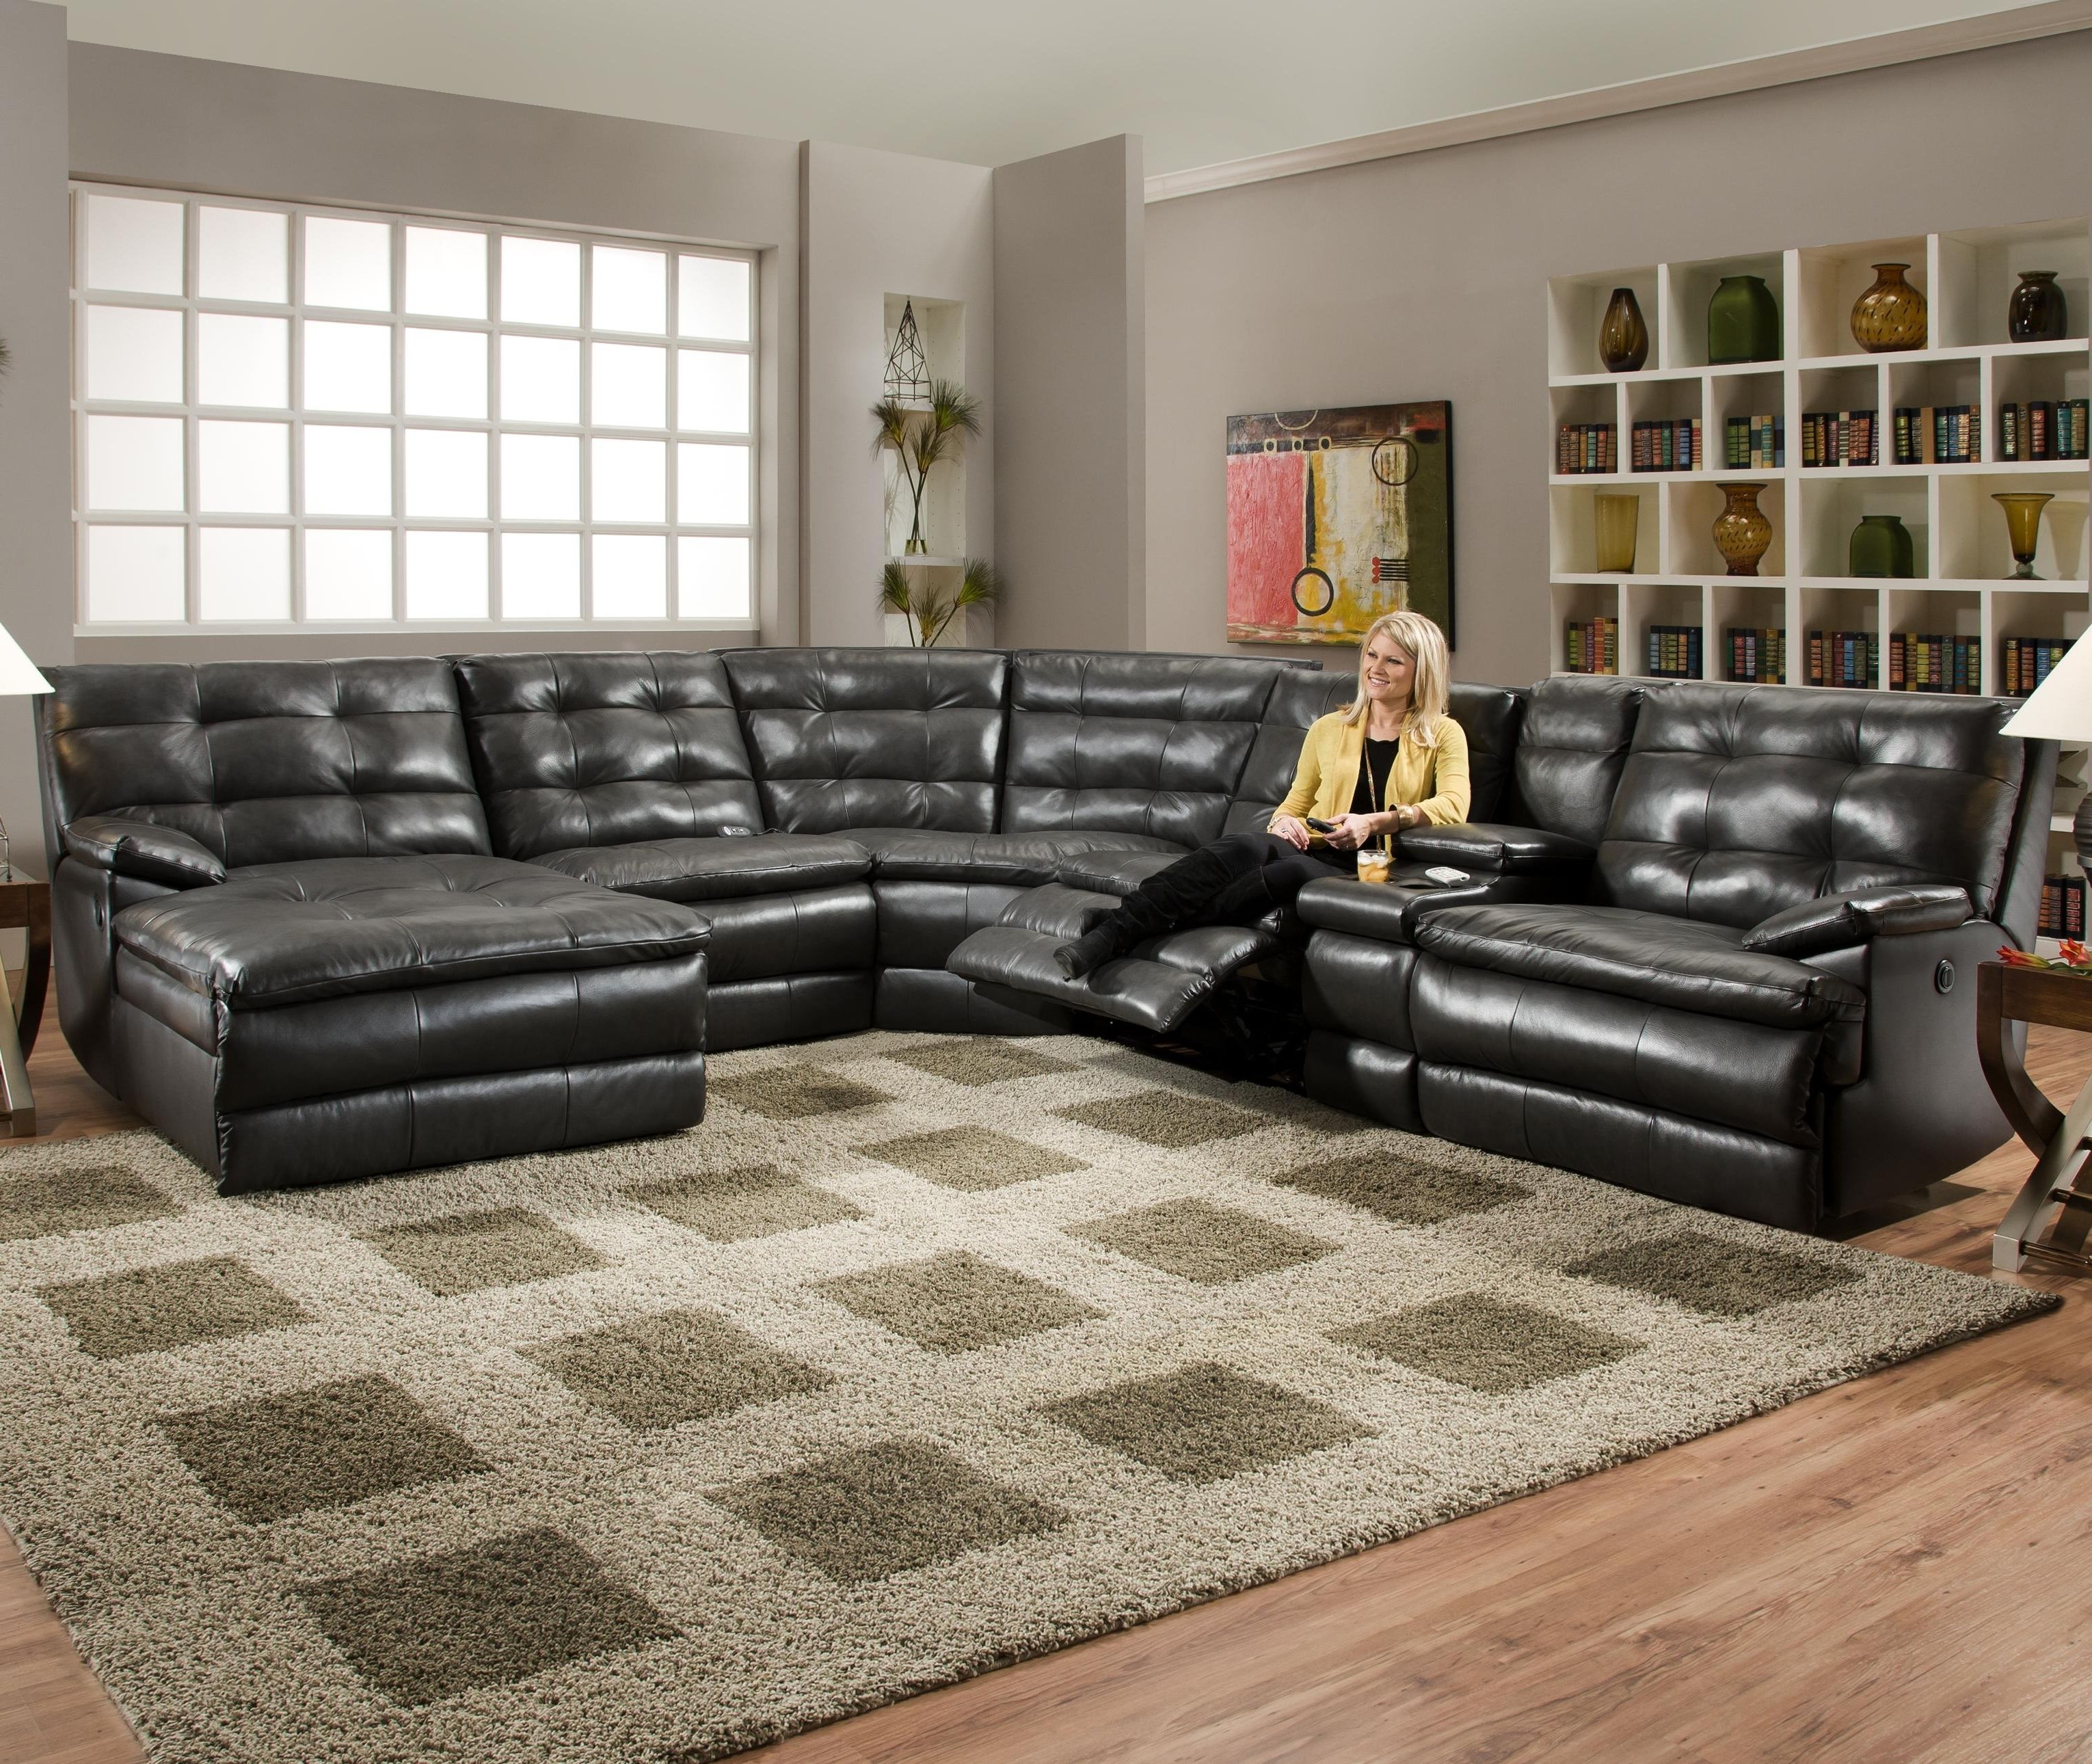 Well Known Luxurious Tufted Leather Sectional Sofa In Classy Black Color With Throughout Reclining Sectional Sofas (View 13 of 15)